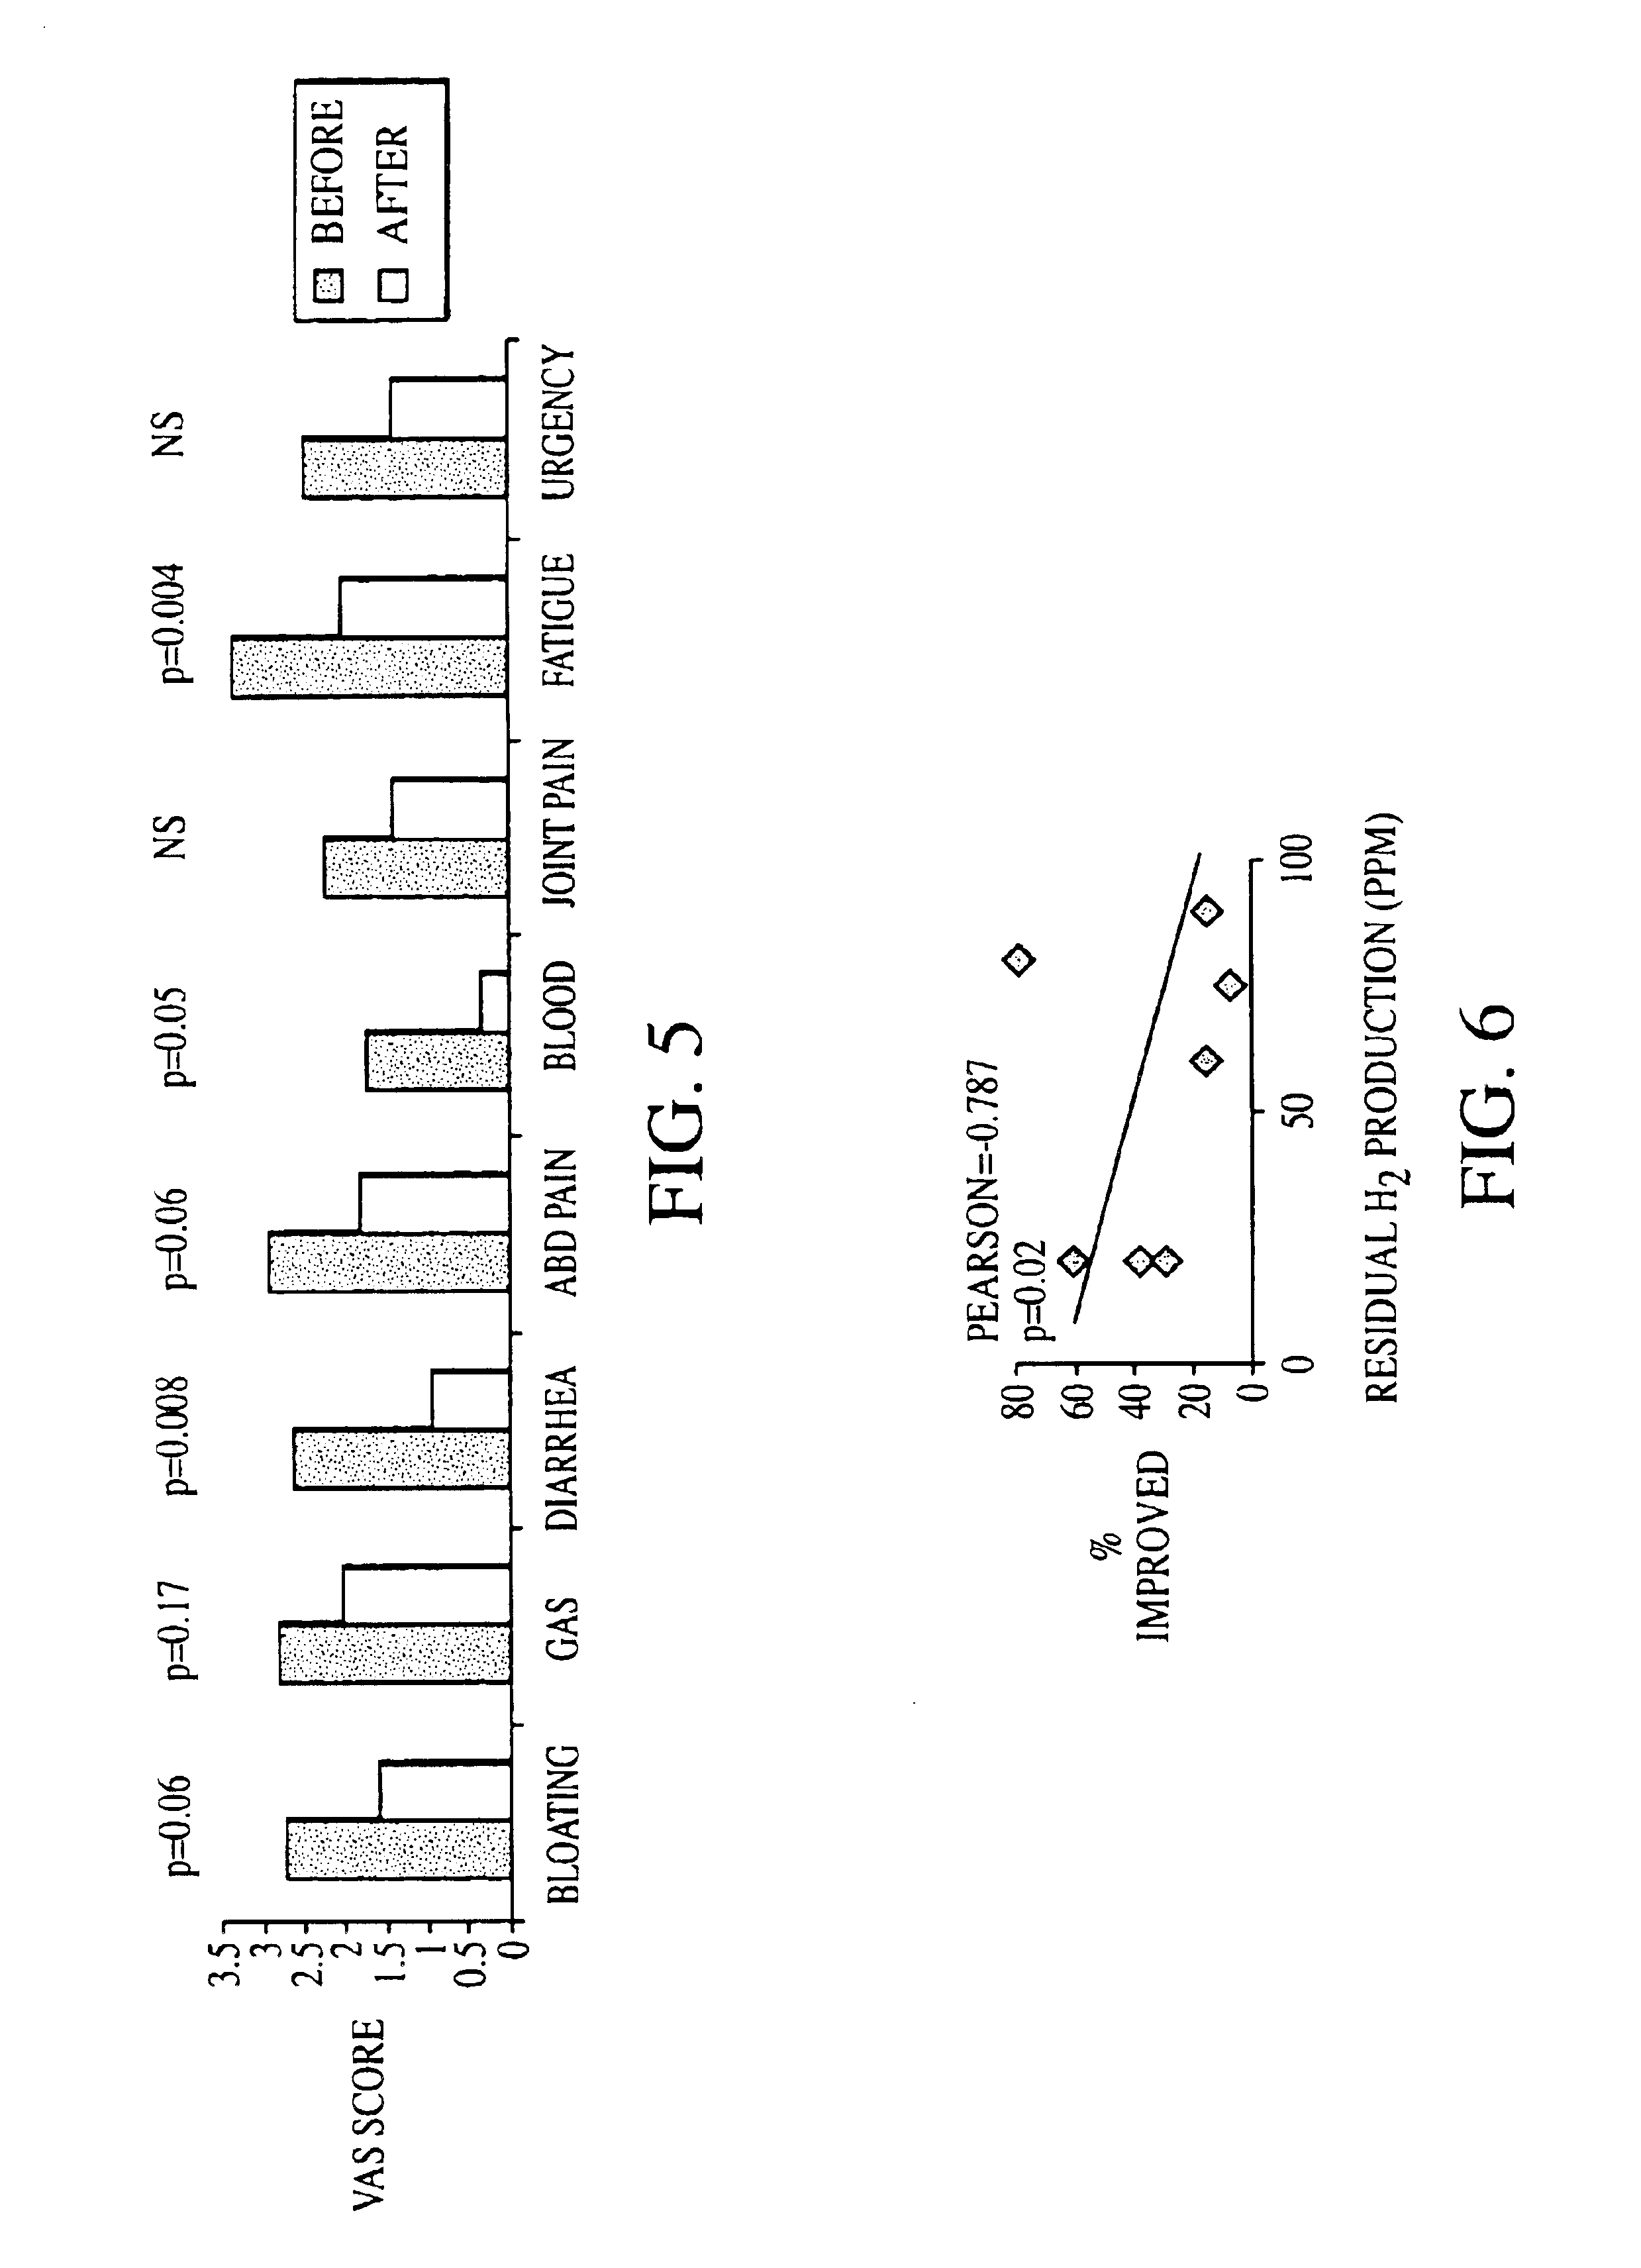 Methods of diagnosing or treating irritable bowel syndrome and other disorders caused by small intestinal bacterial overgrowth